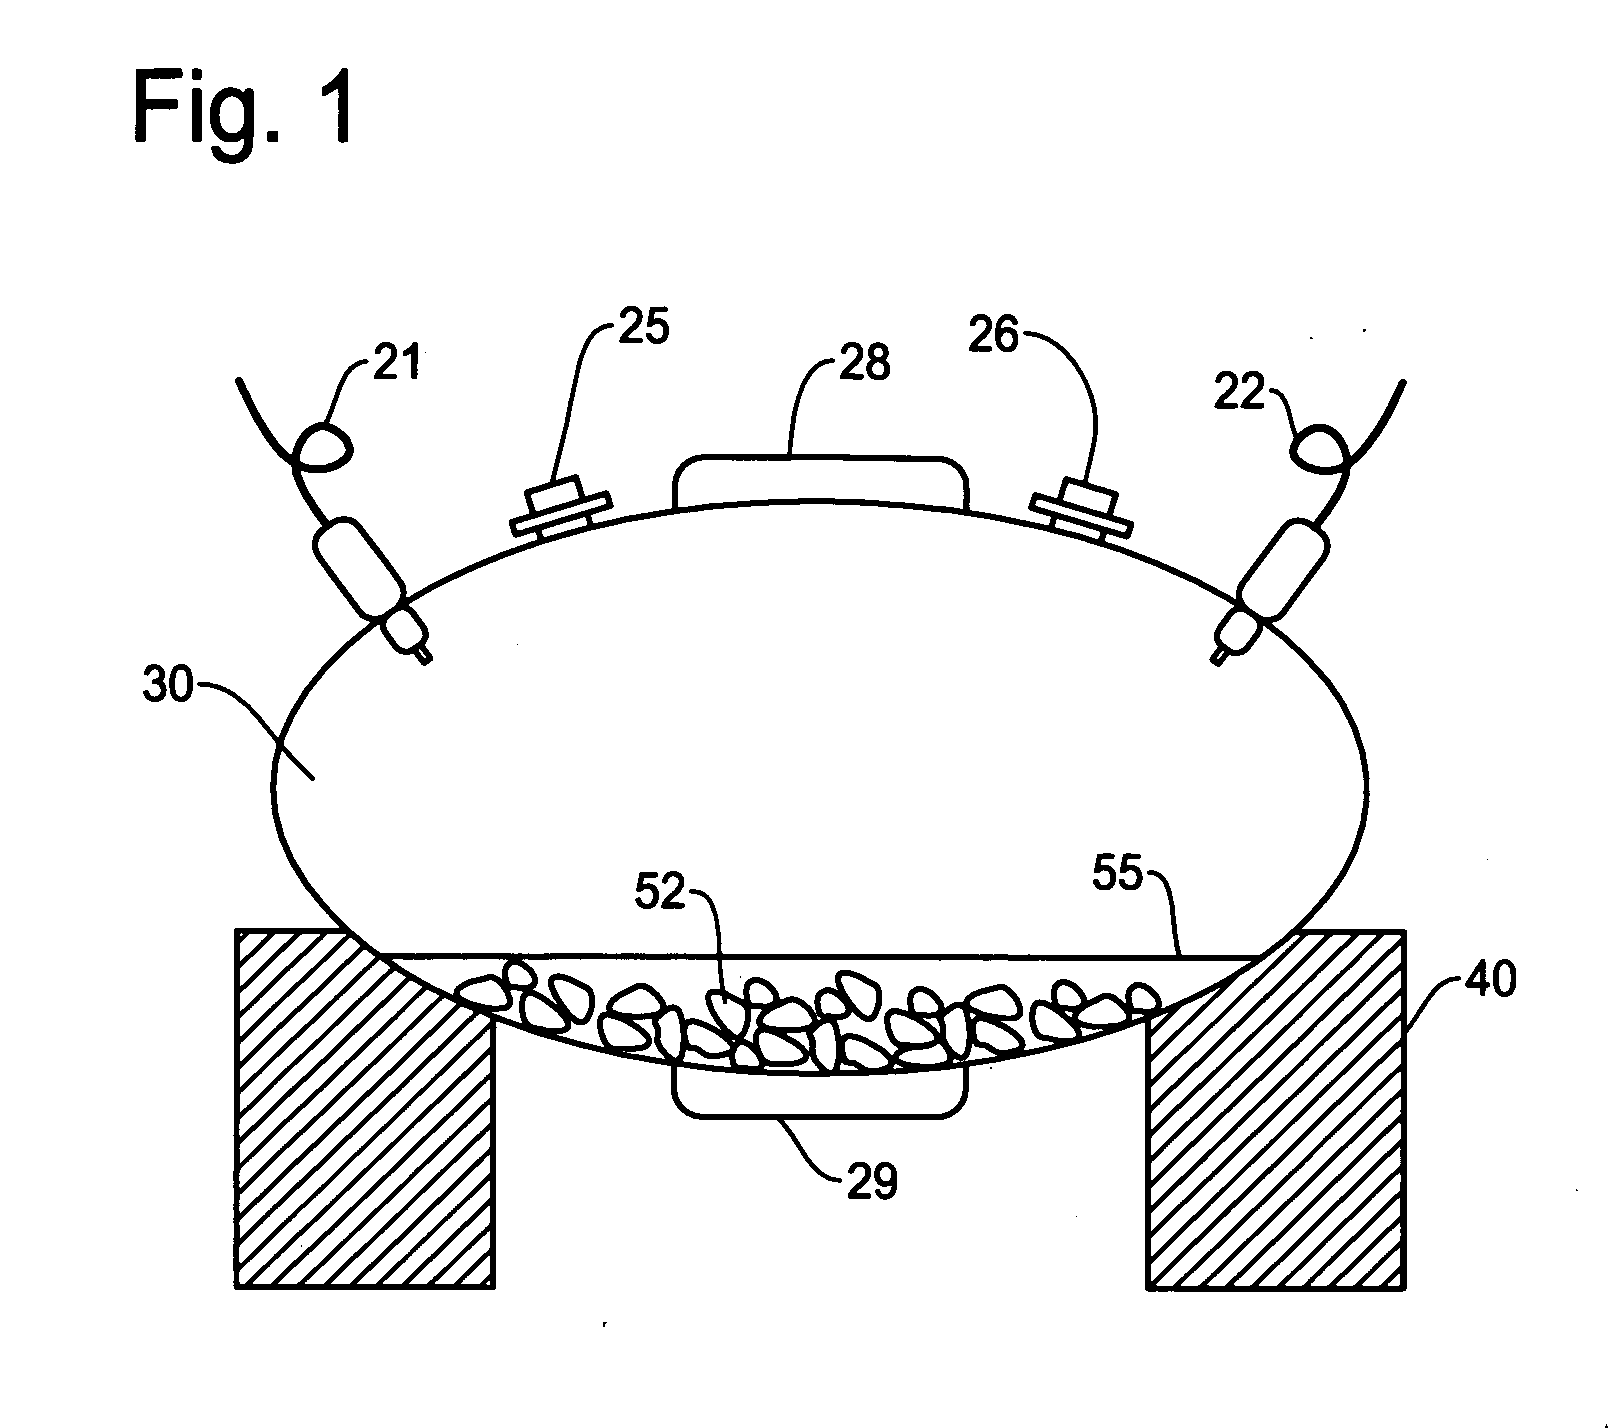 Manufacturing method and apparatus for producing substances that include negative hydrogen ion